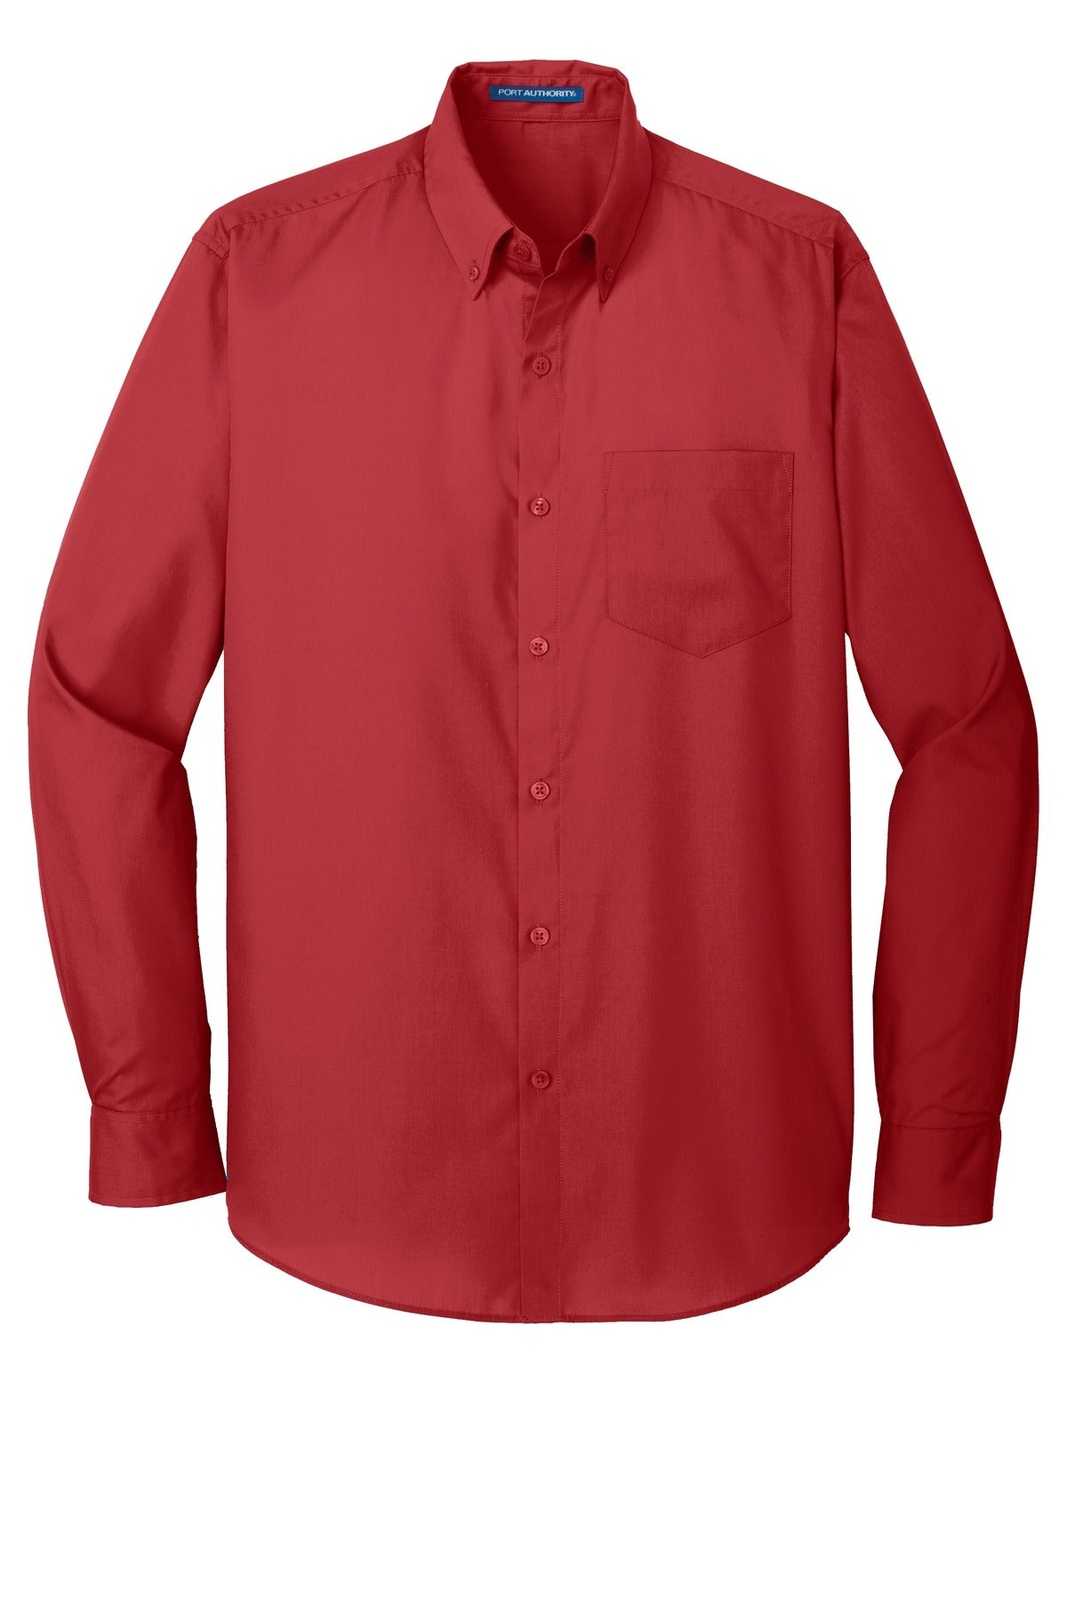 Port Authority W100 Long Sleeve Carefree Poplin Shirt - Rich Red - HIT a Double - 5